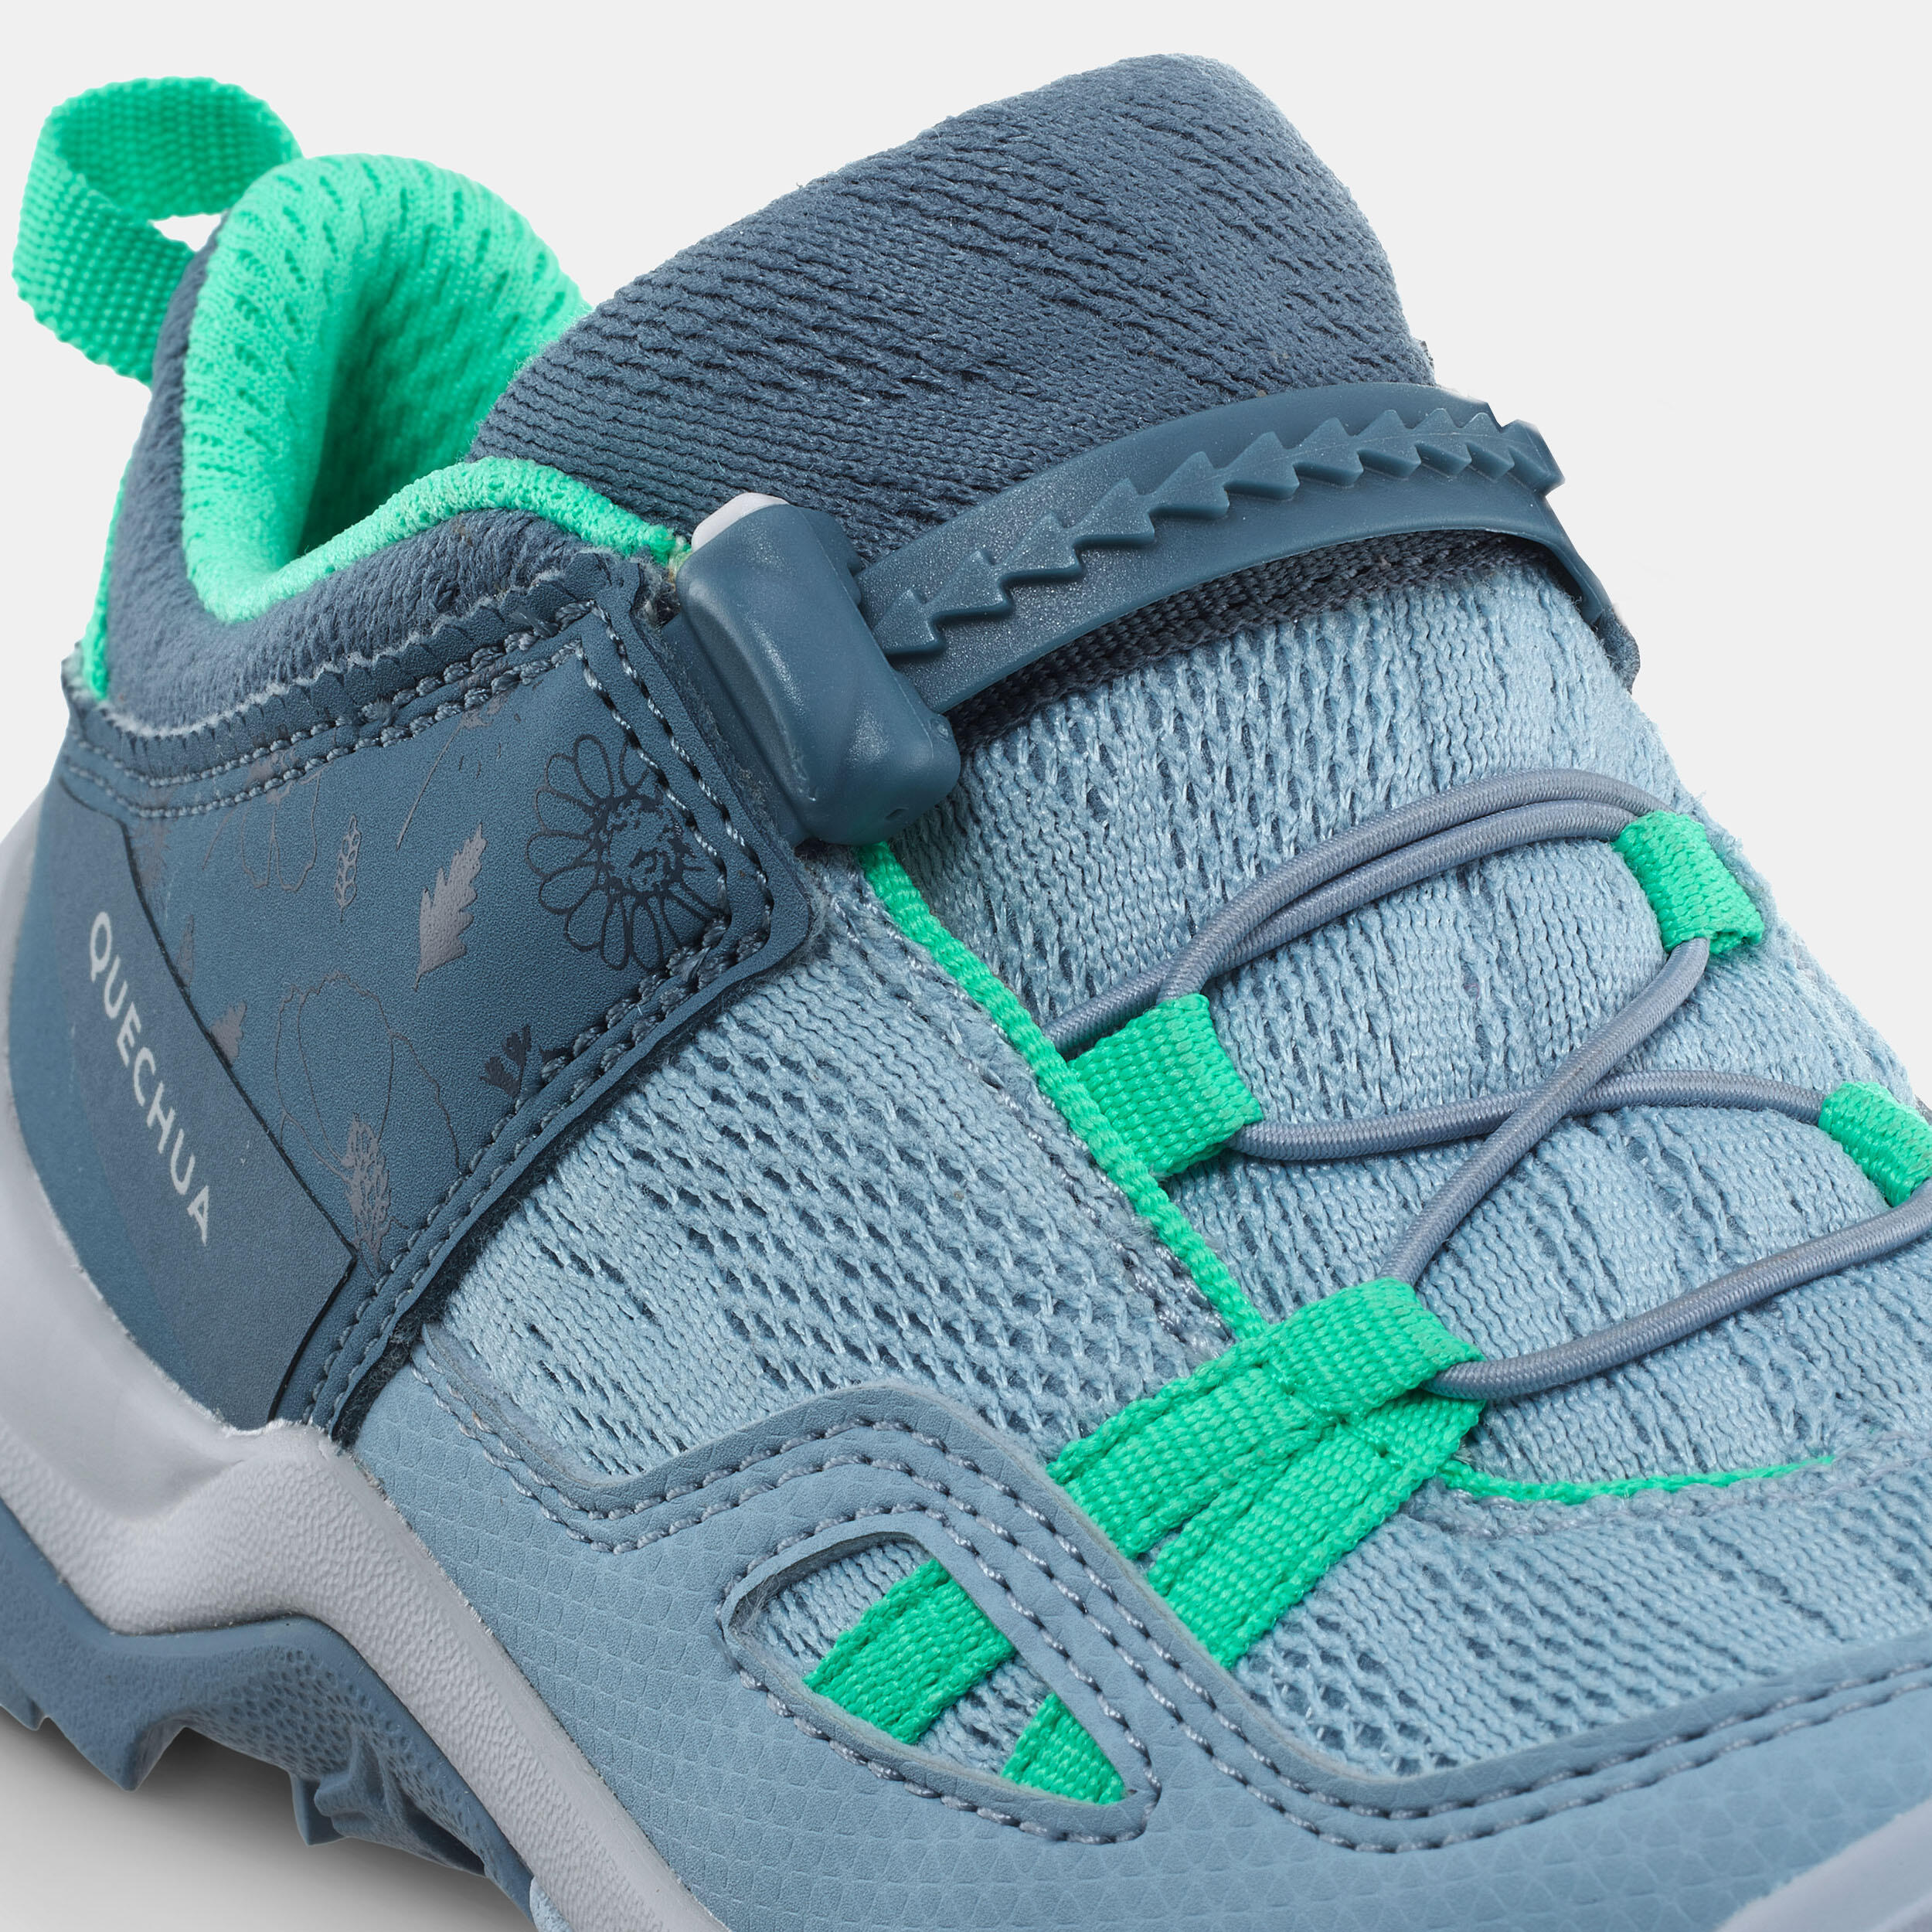 Kids’ Crossrock hiking shoes with quick adjustment, blue, from size 28 to 34 5/6